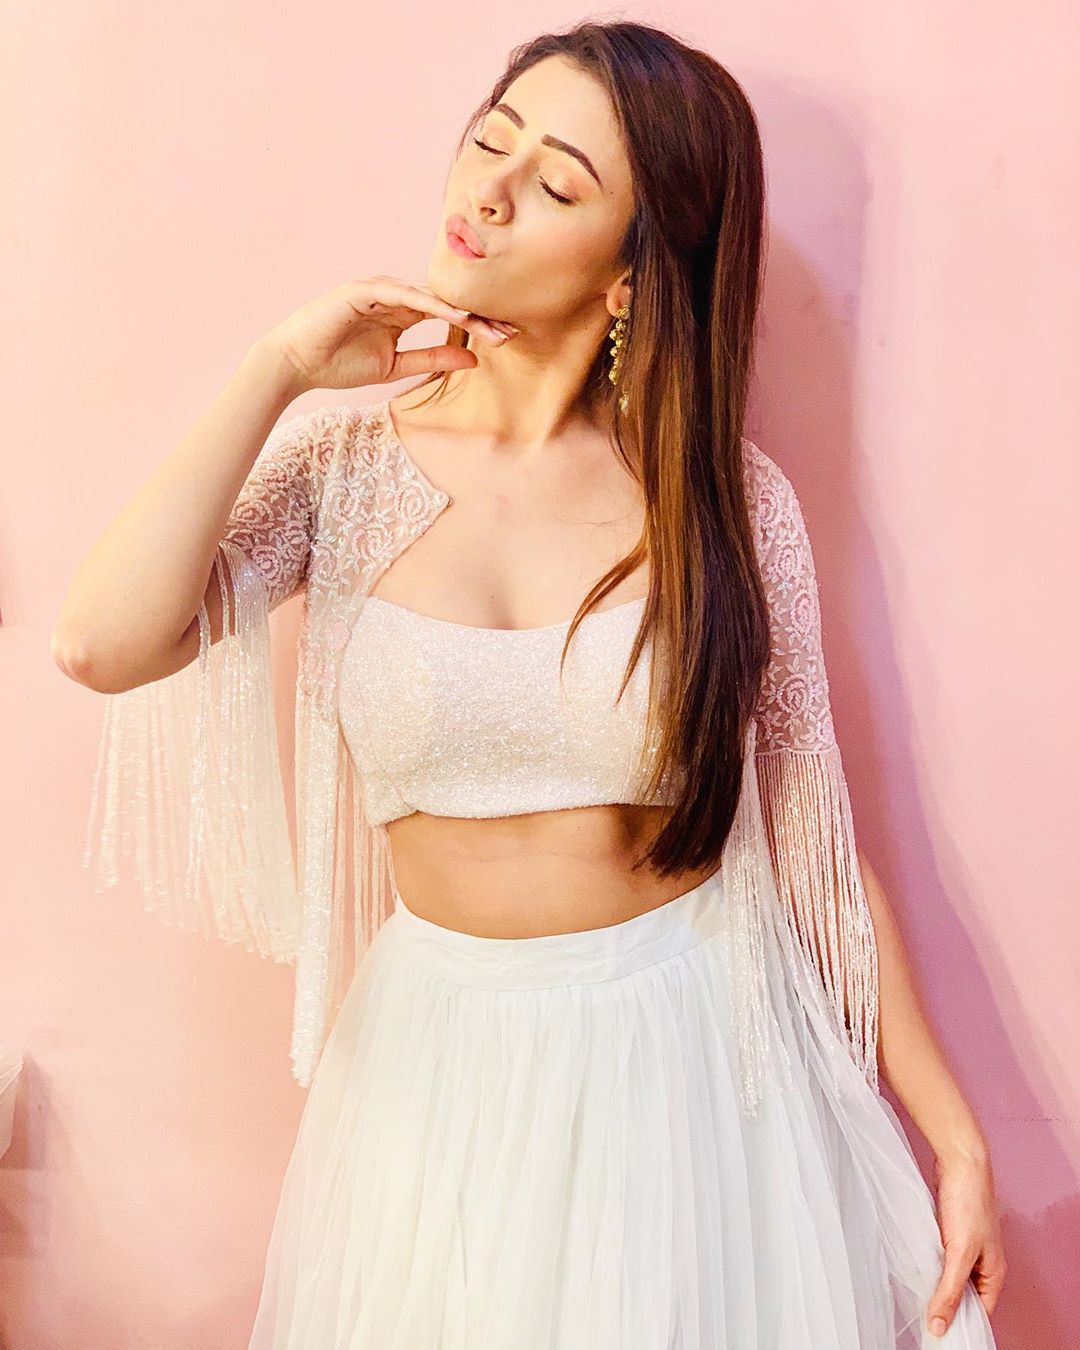 Hiba Nawab Oozing Sex Appeal In A Sexy White Dress